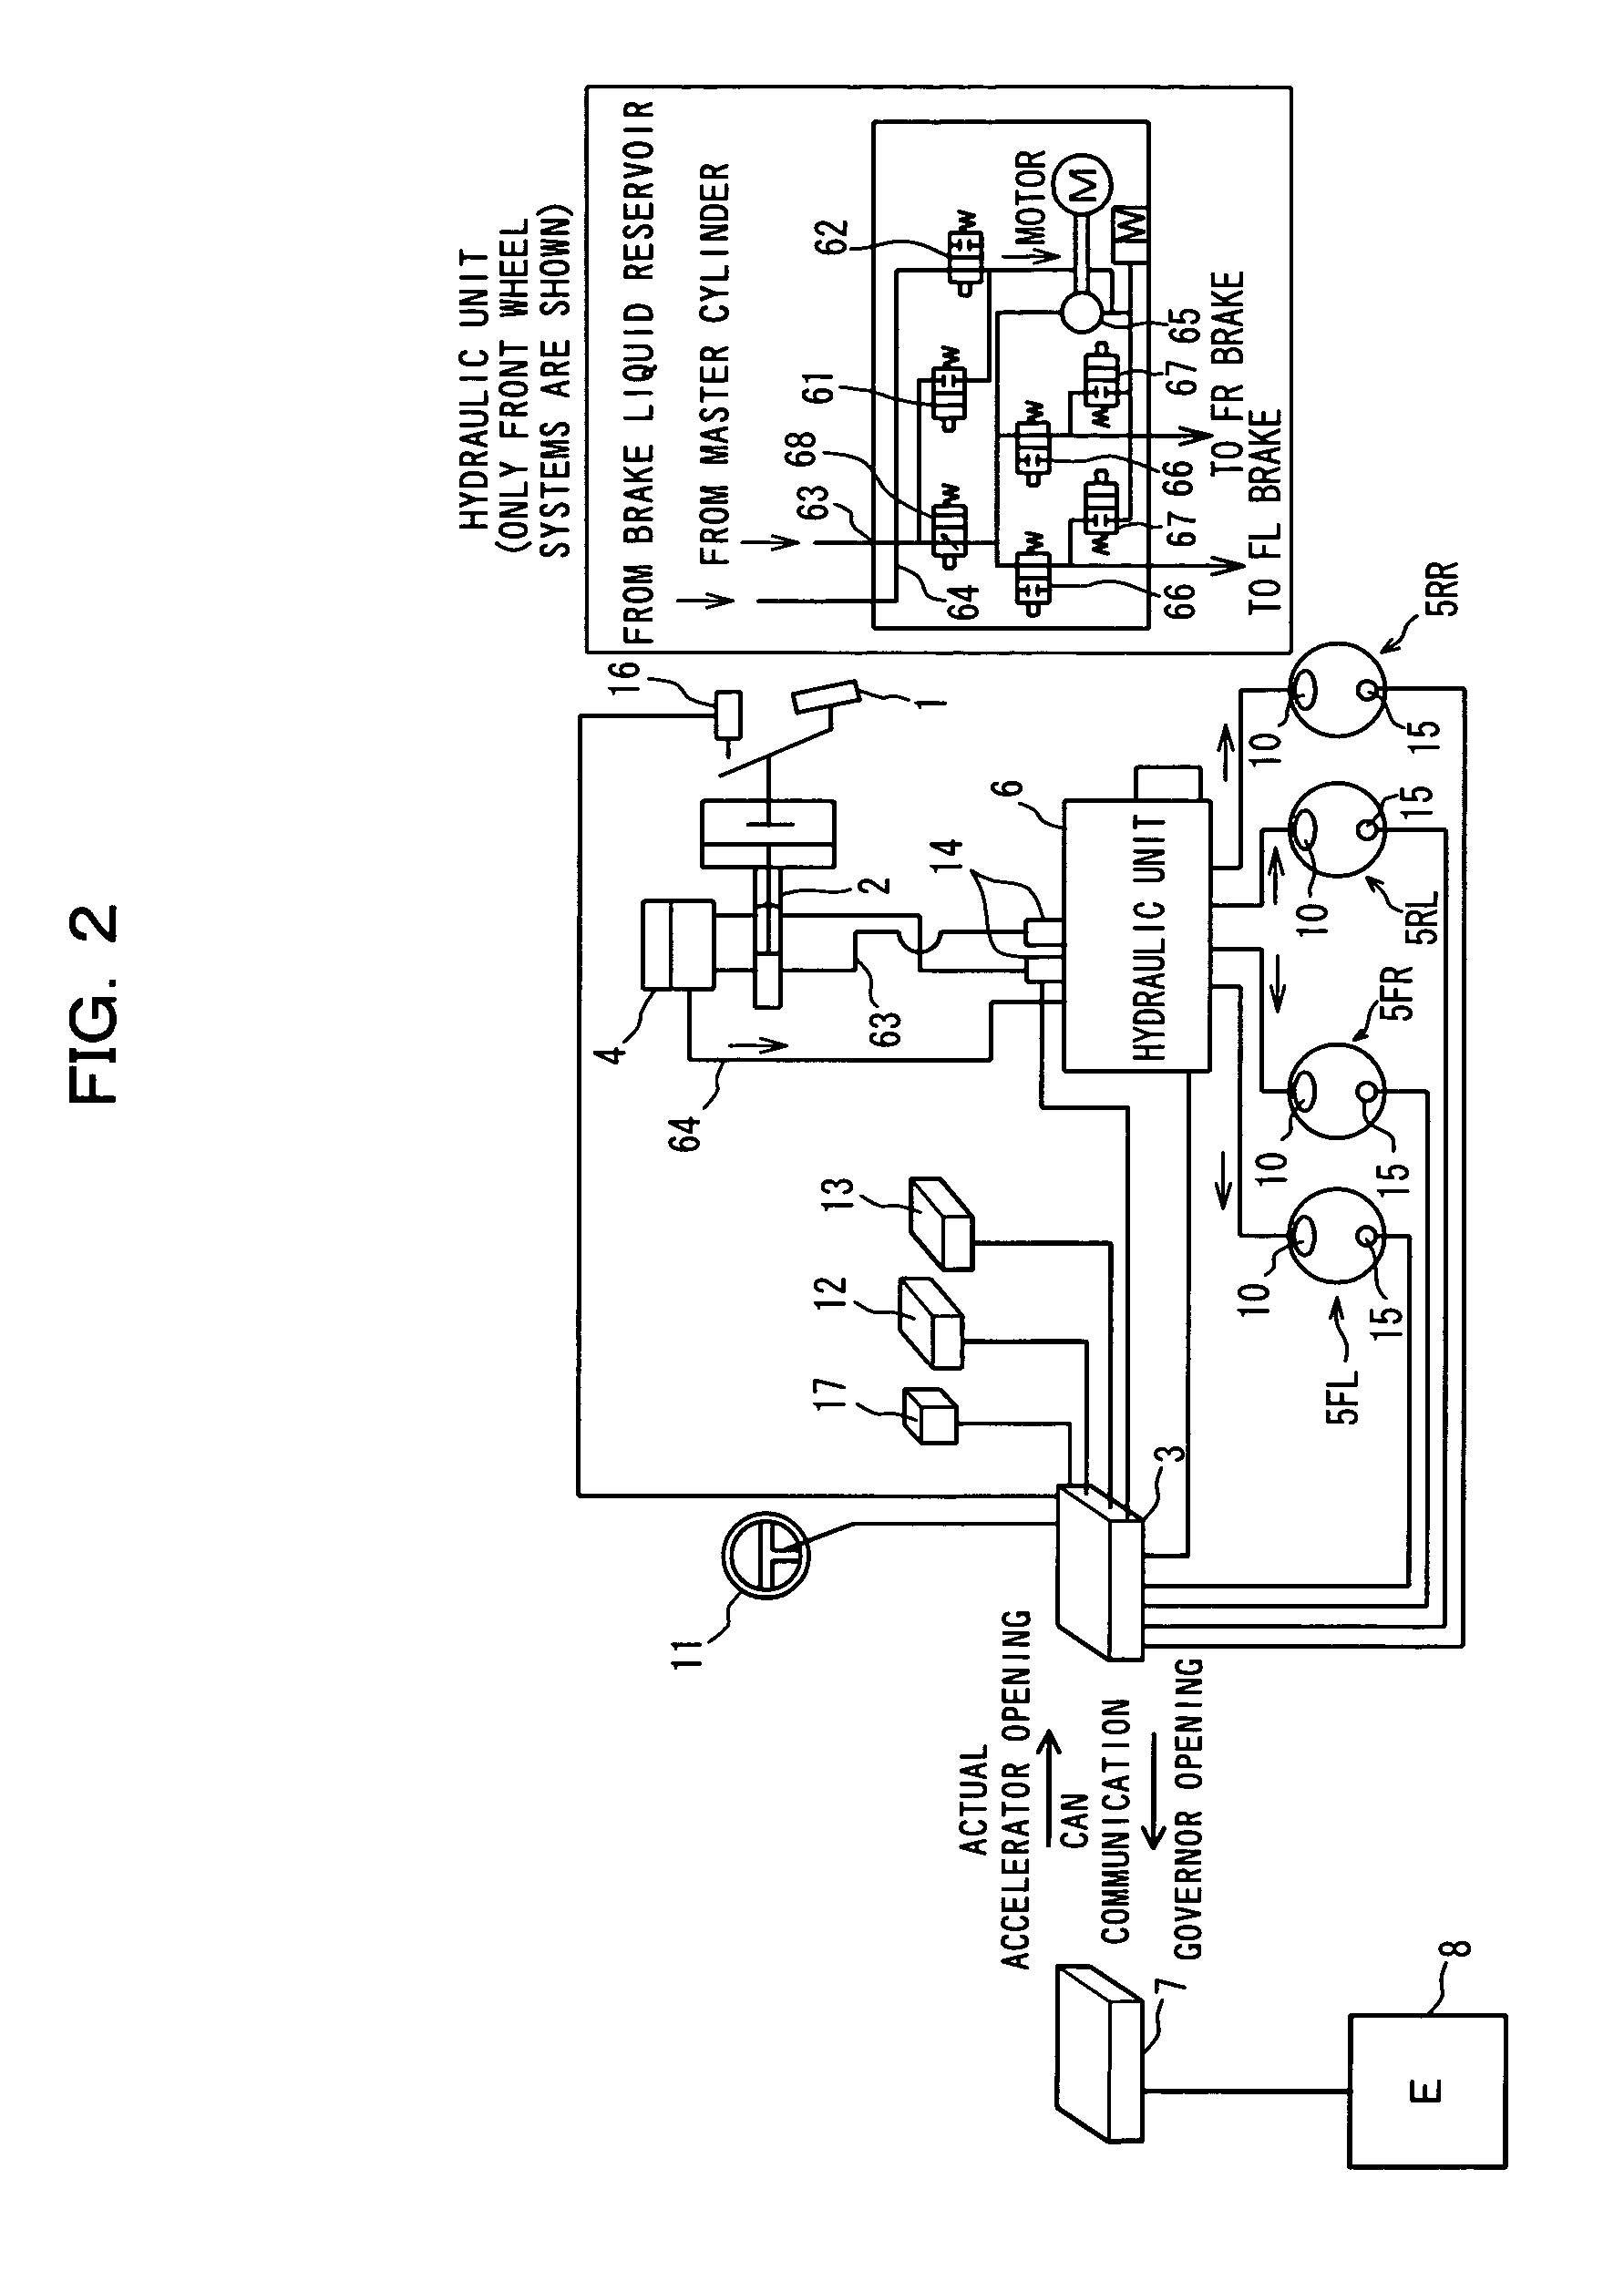 Roll-over suppressing control apparatus and method for a vehicle